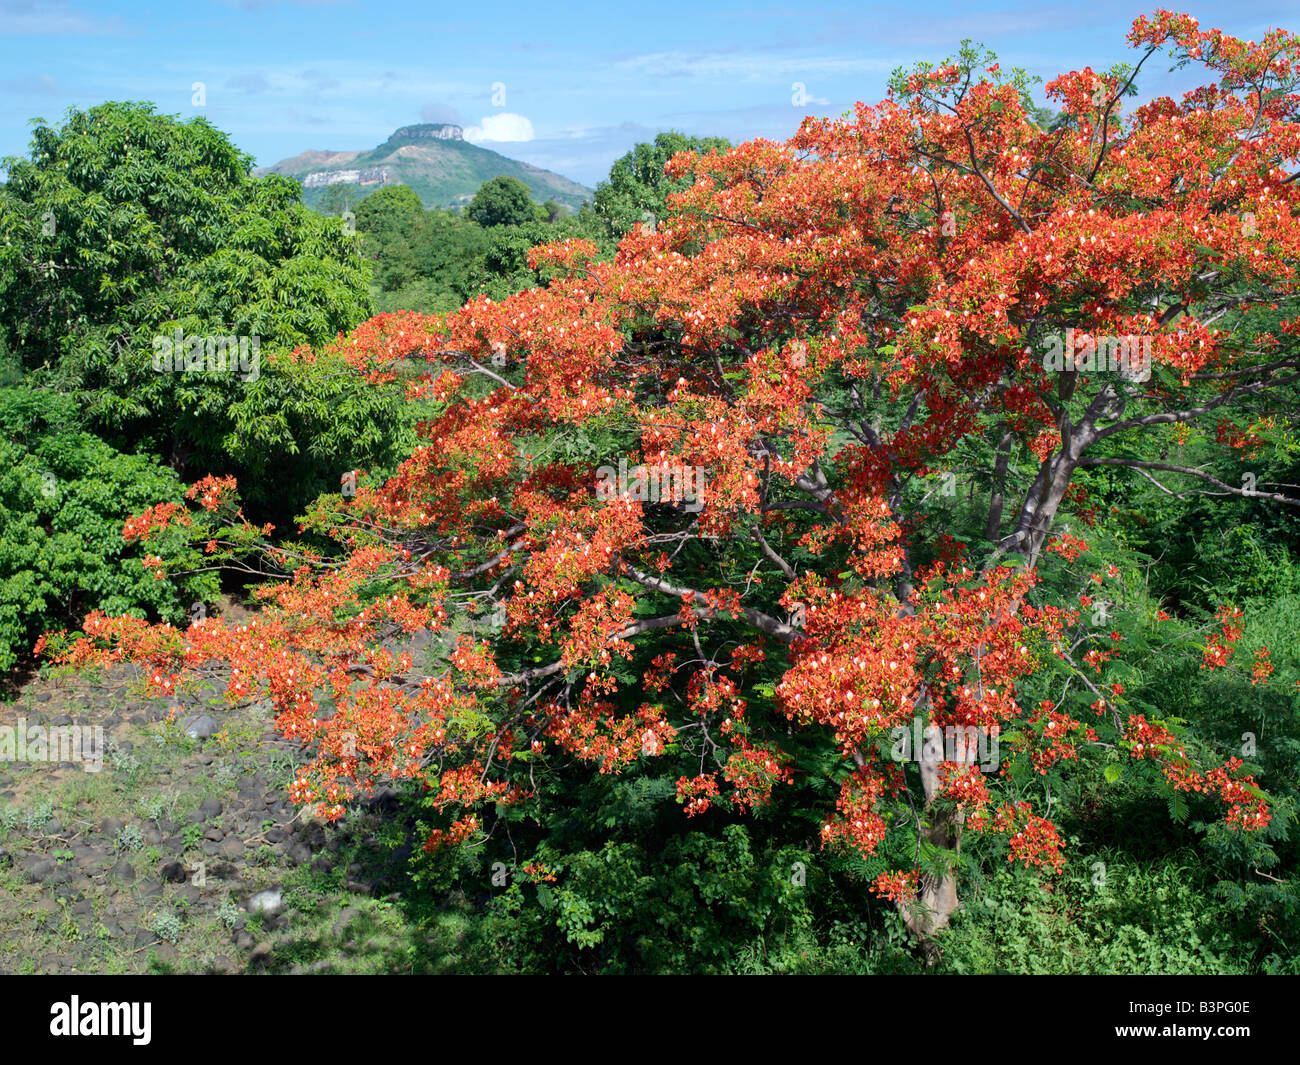 Northern Madagascar, A beautiful flamboyant tree - a native of Madagascar - growing just outside Antsiranana, more commonly known as Diego. Stock Photo